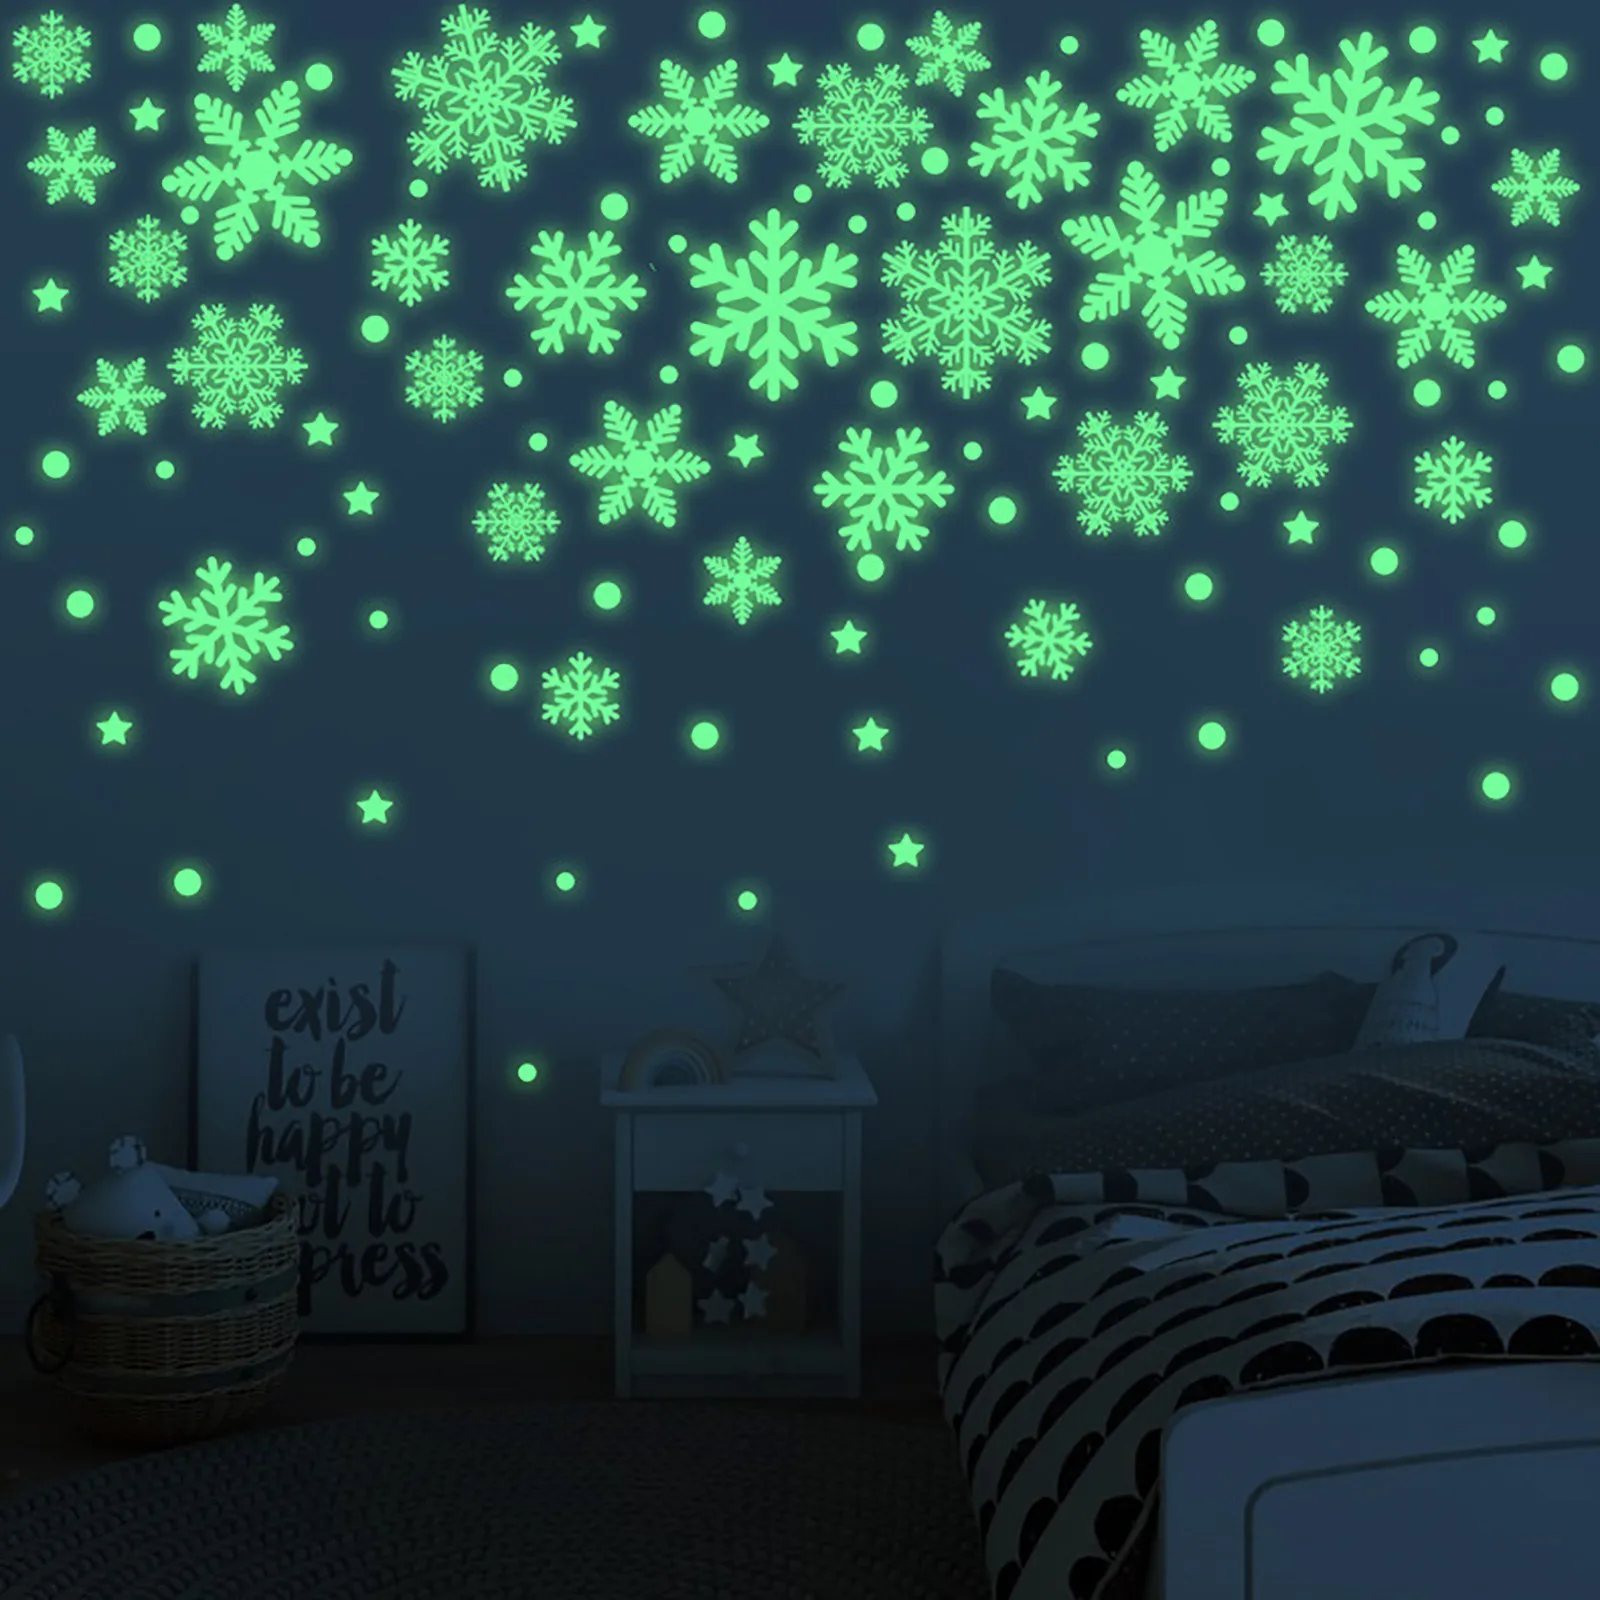 50 Christmas Snowflakes Glow in the Dark Wall Stickers Wall Bedroom Decor BS 